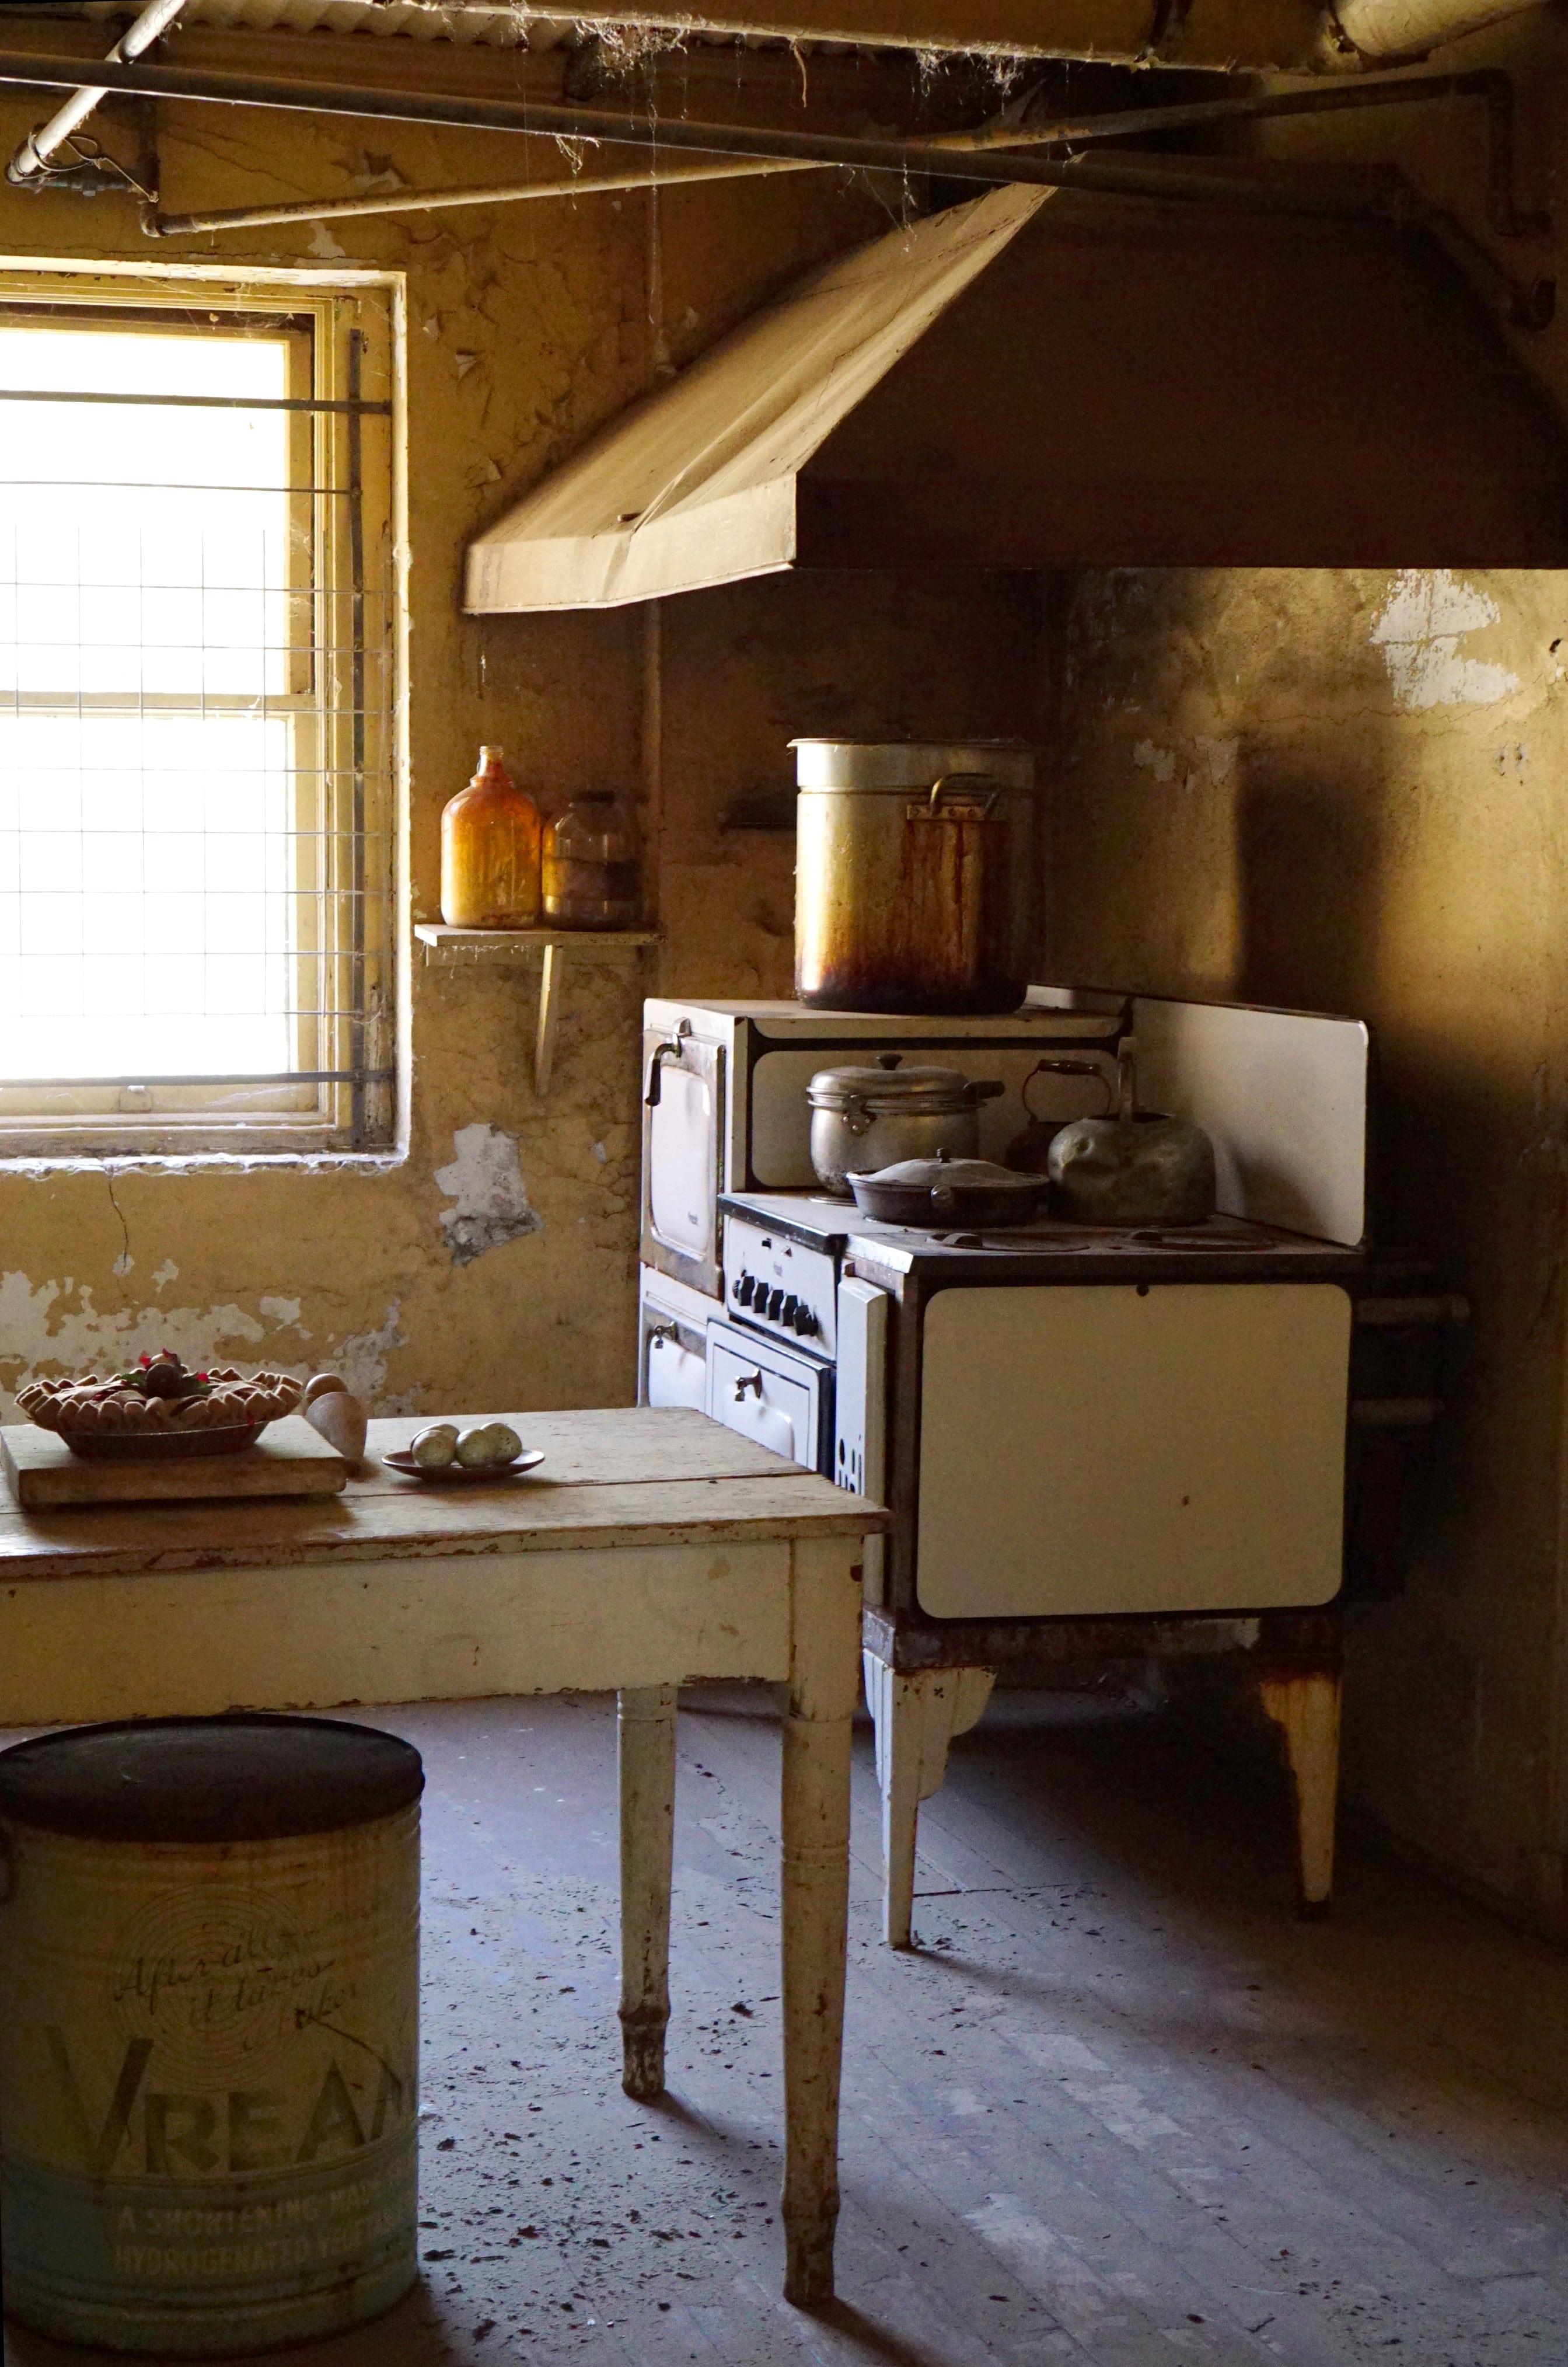 Kitchen with antique stove, room is filled with both sunbeams and spiderwebs